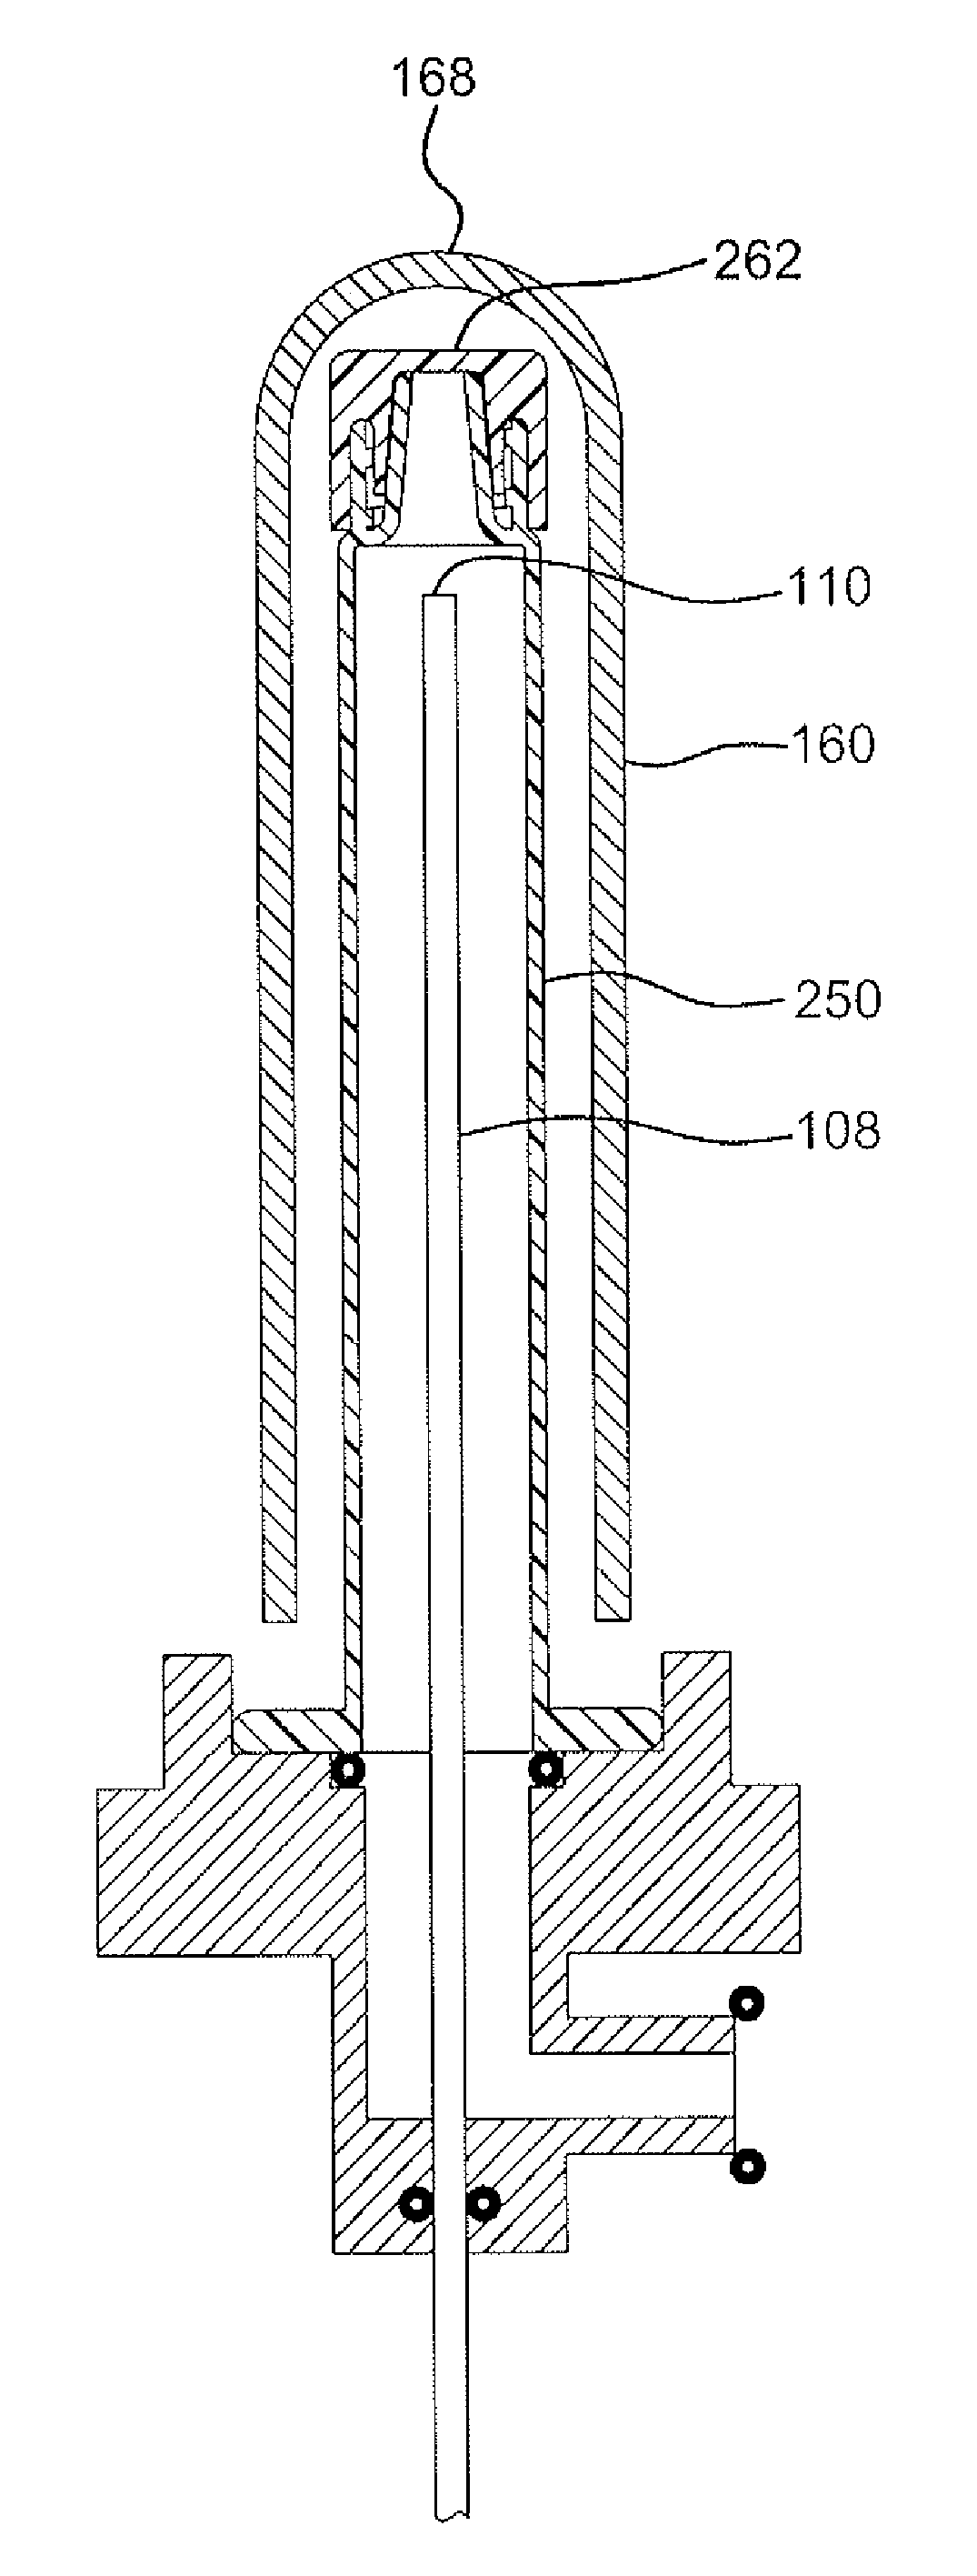 Vessel, coating, inspection and processing apparatus